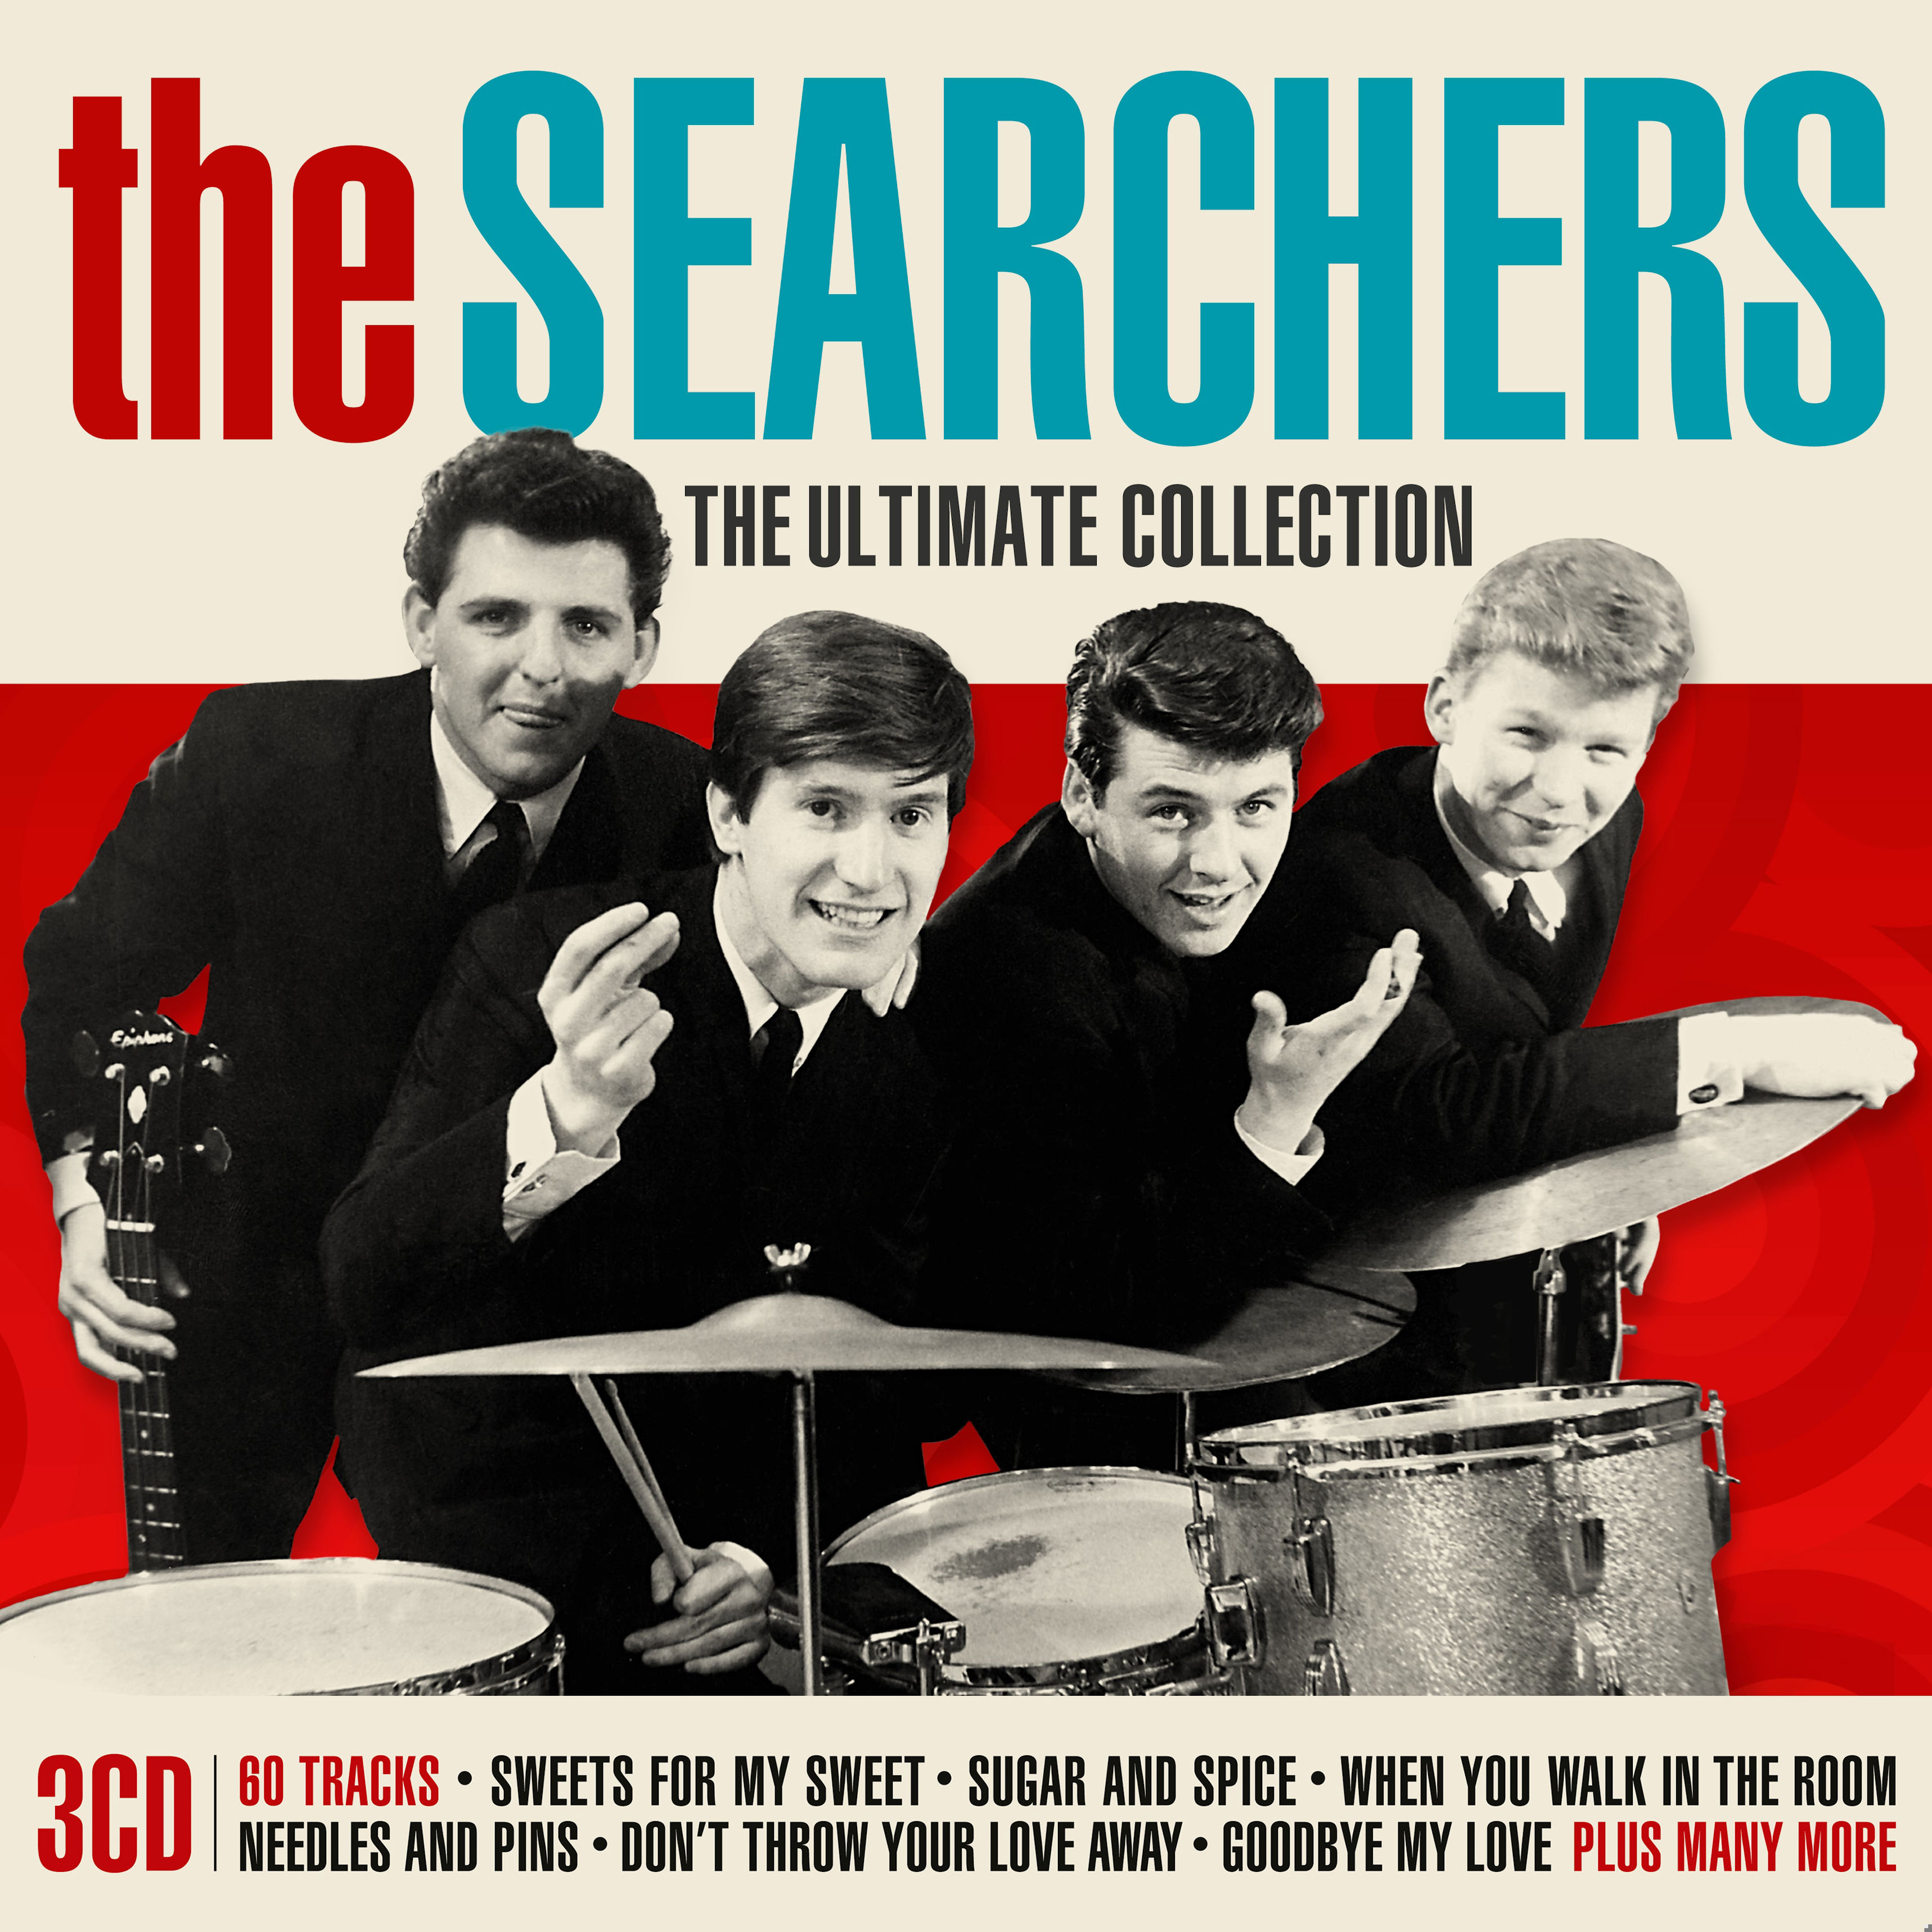 britain’s oldest pop band the searchers remember merseybeat, the beatles and an abrasive john lennon